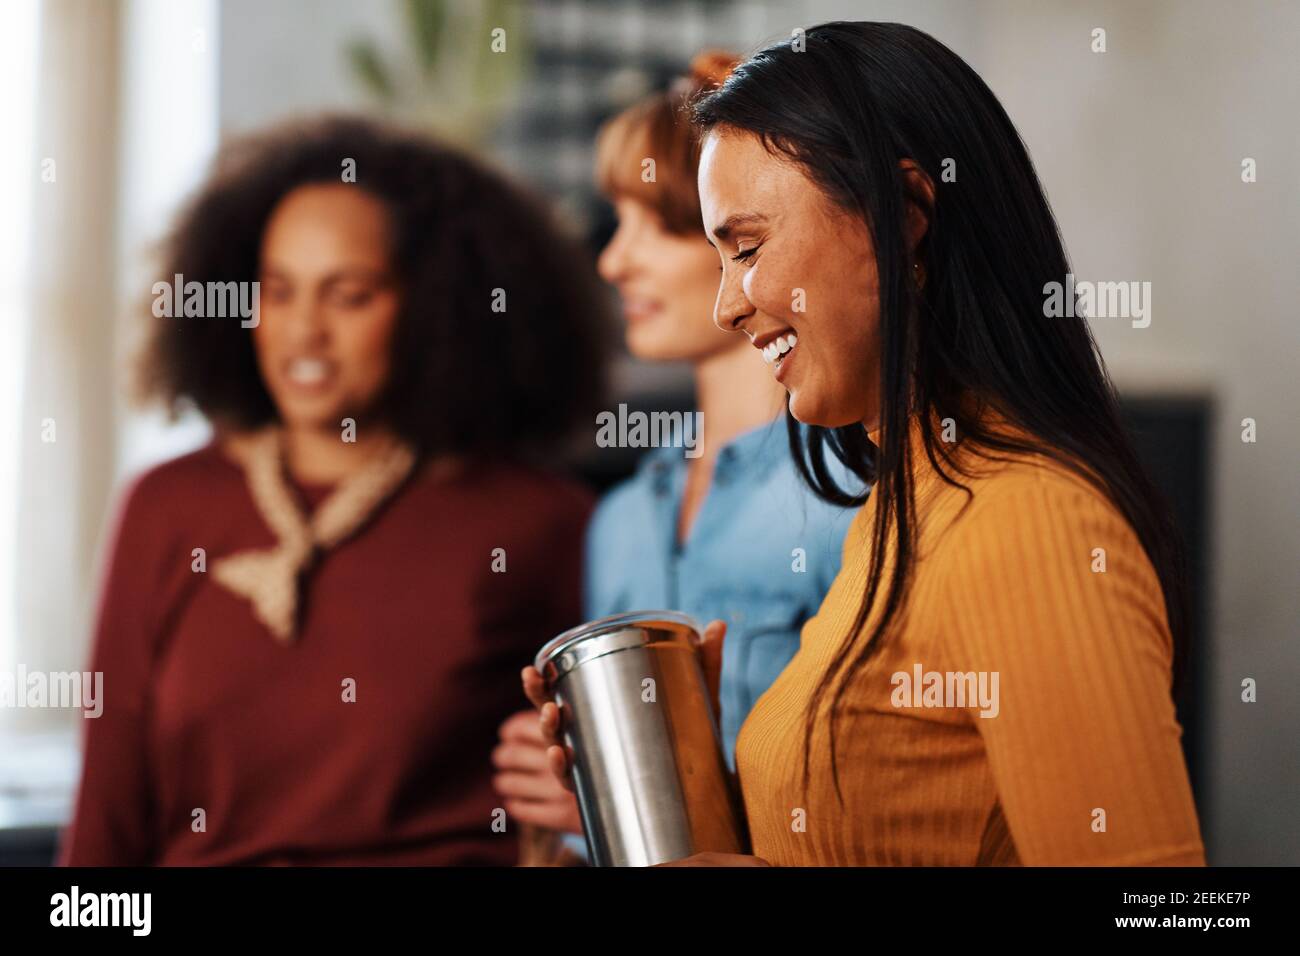 Young woman laughing while hanging out with her diverse group of female friends in an apartment kitchen Stock Photo